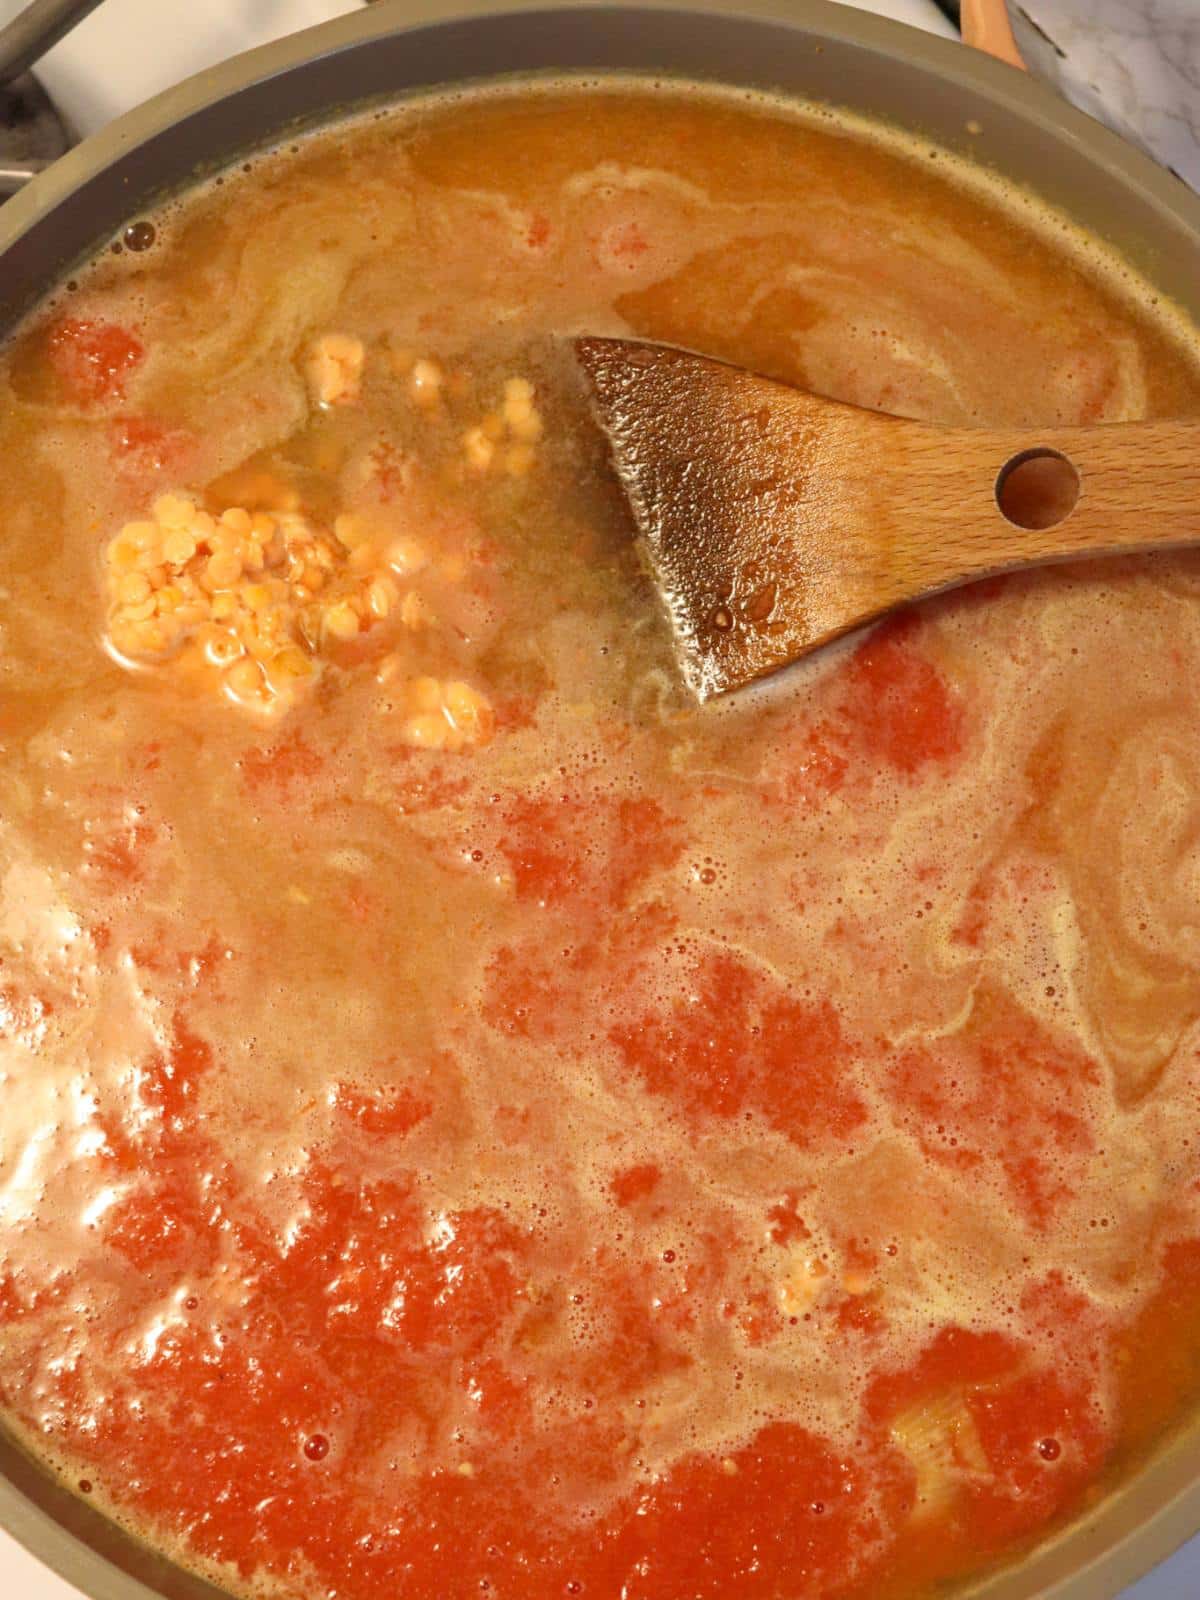 Red lentils, spices, crushed tomatoes and vegetable broth in a soup pan on the stove.